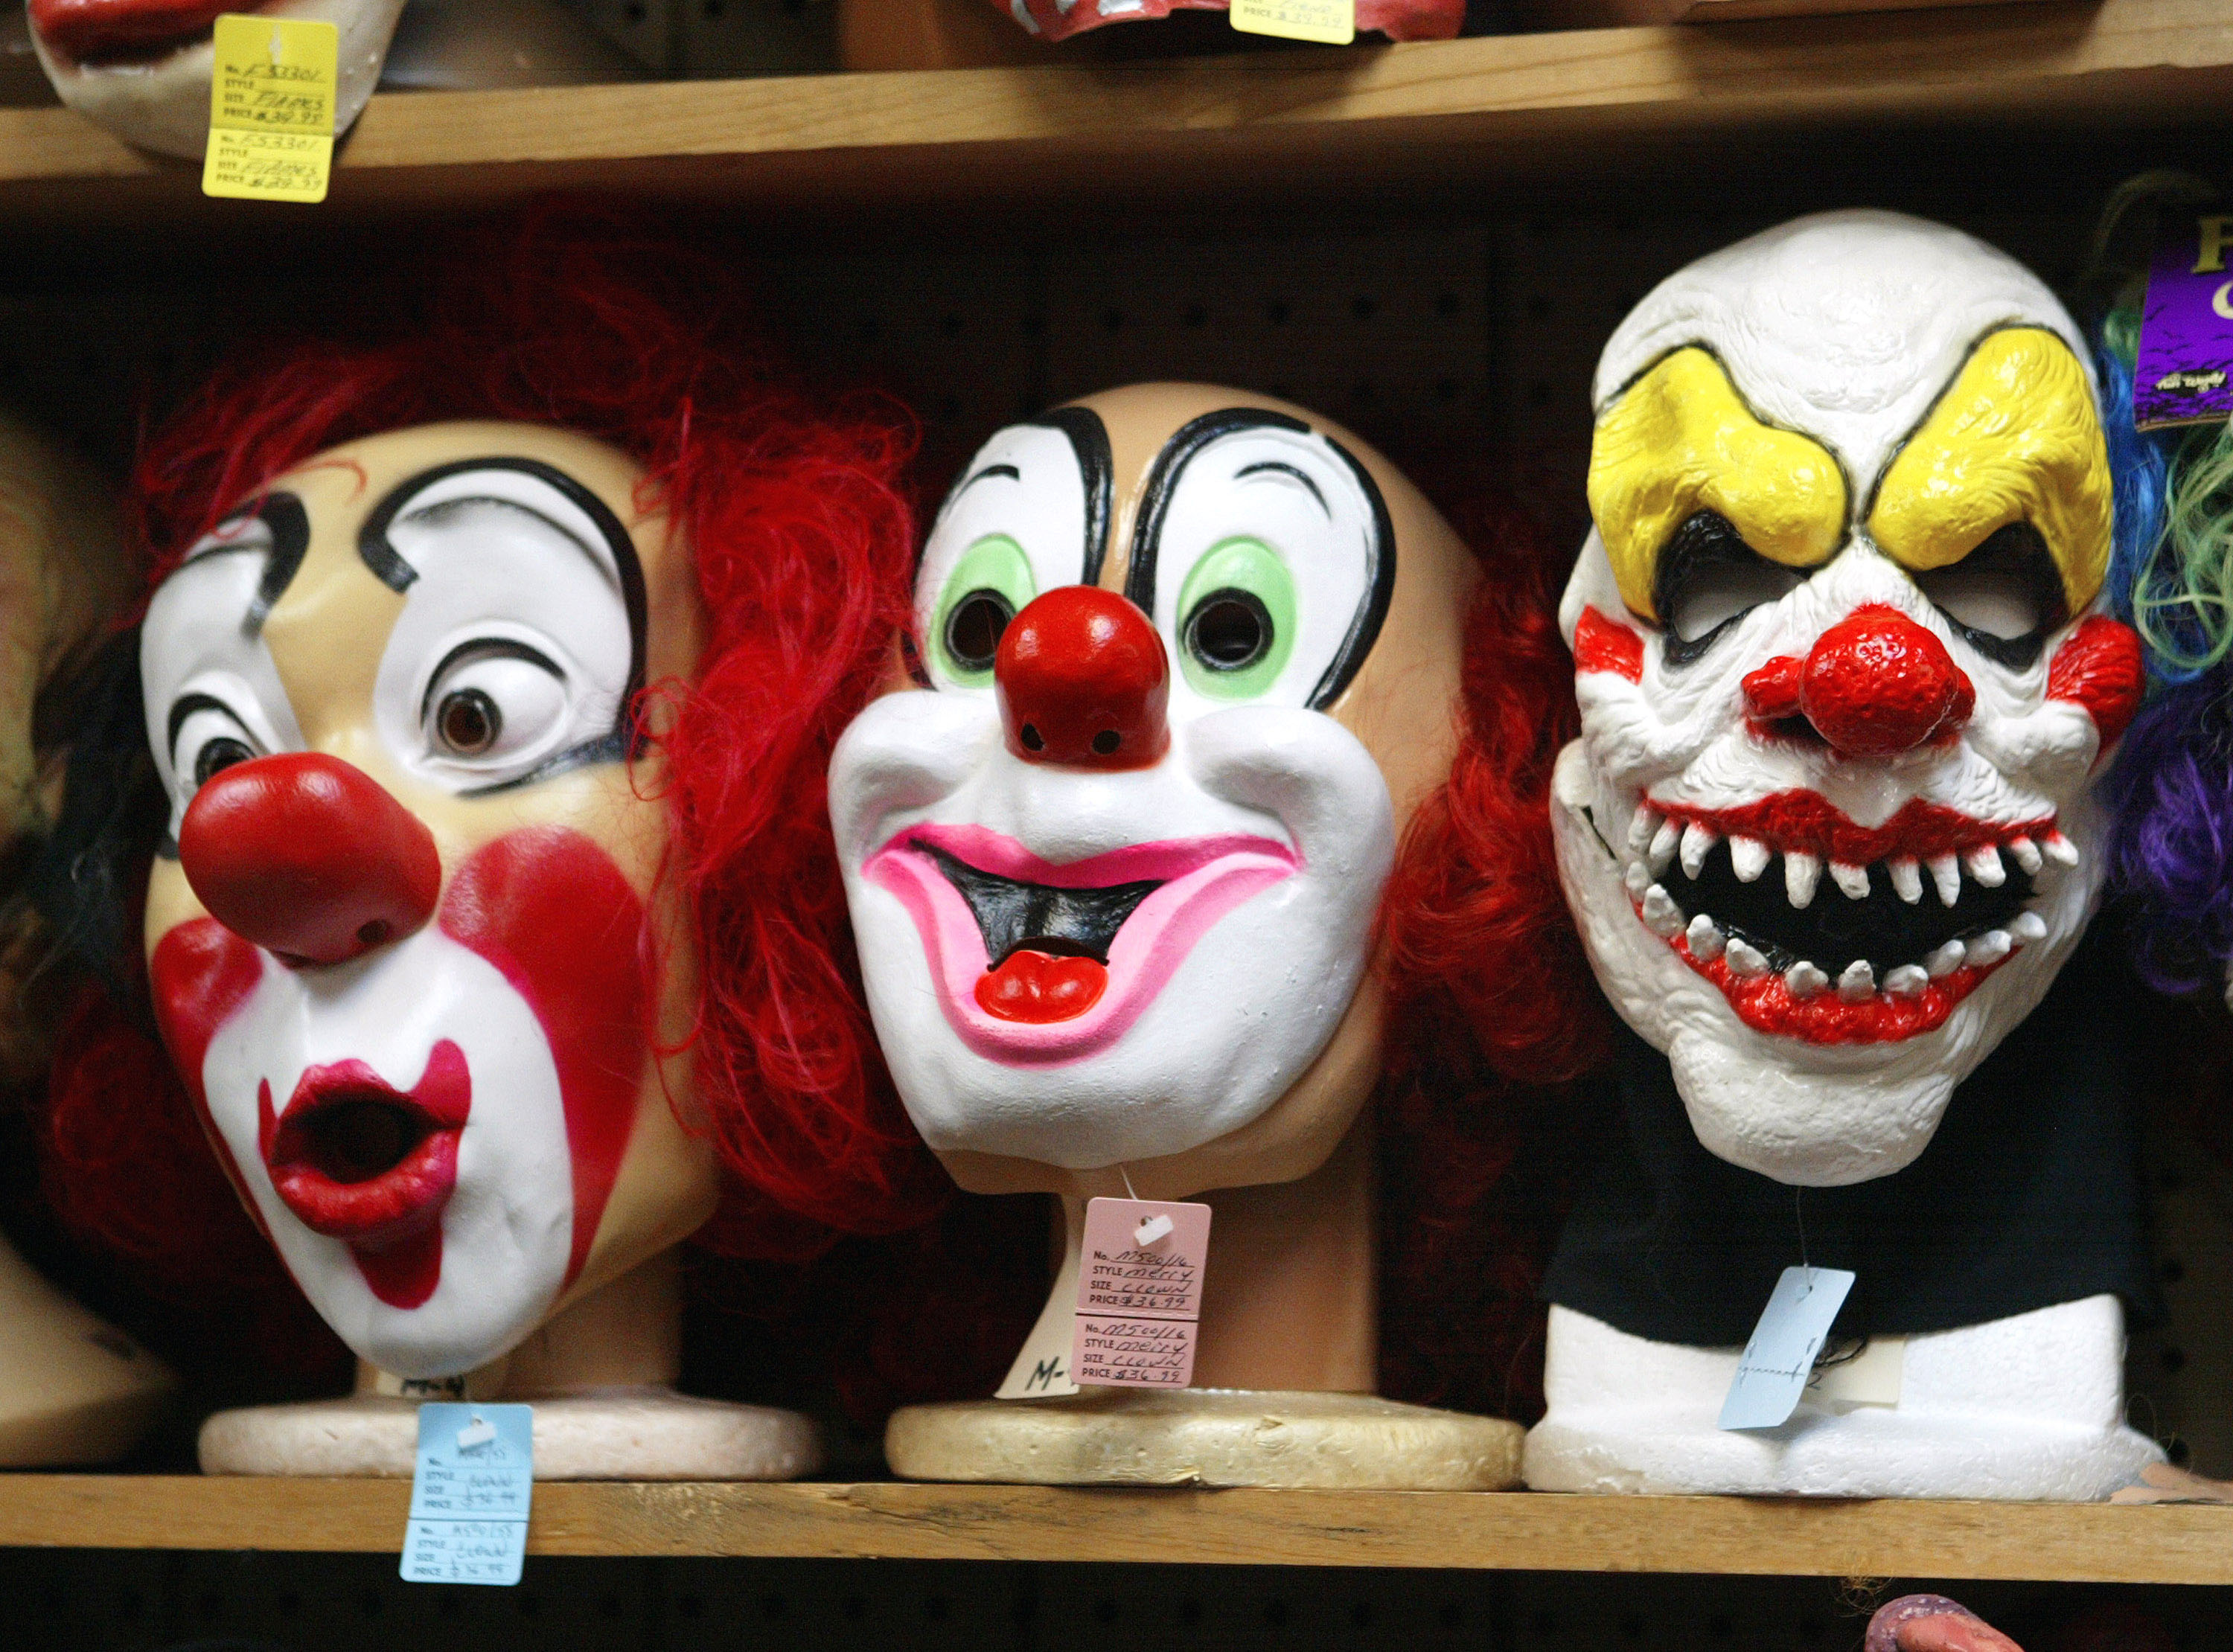 CHICAGO - OCTOBER 17:  Clown masks are displayed at the Fantasy Costumes HDQ. store October 17, 2003 in Chicago, Illinois. Halloween, the day normally observed with dressing up in disguise, trick-or-treating, and displaying jack-o-lanterns during the evening is only two weeks away on October 31.  (Photo by Tim Boyle/Getty Images)